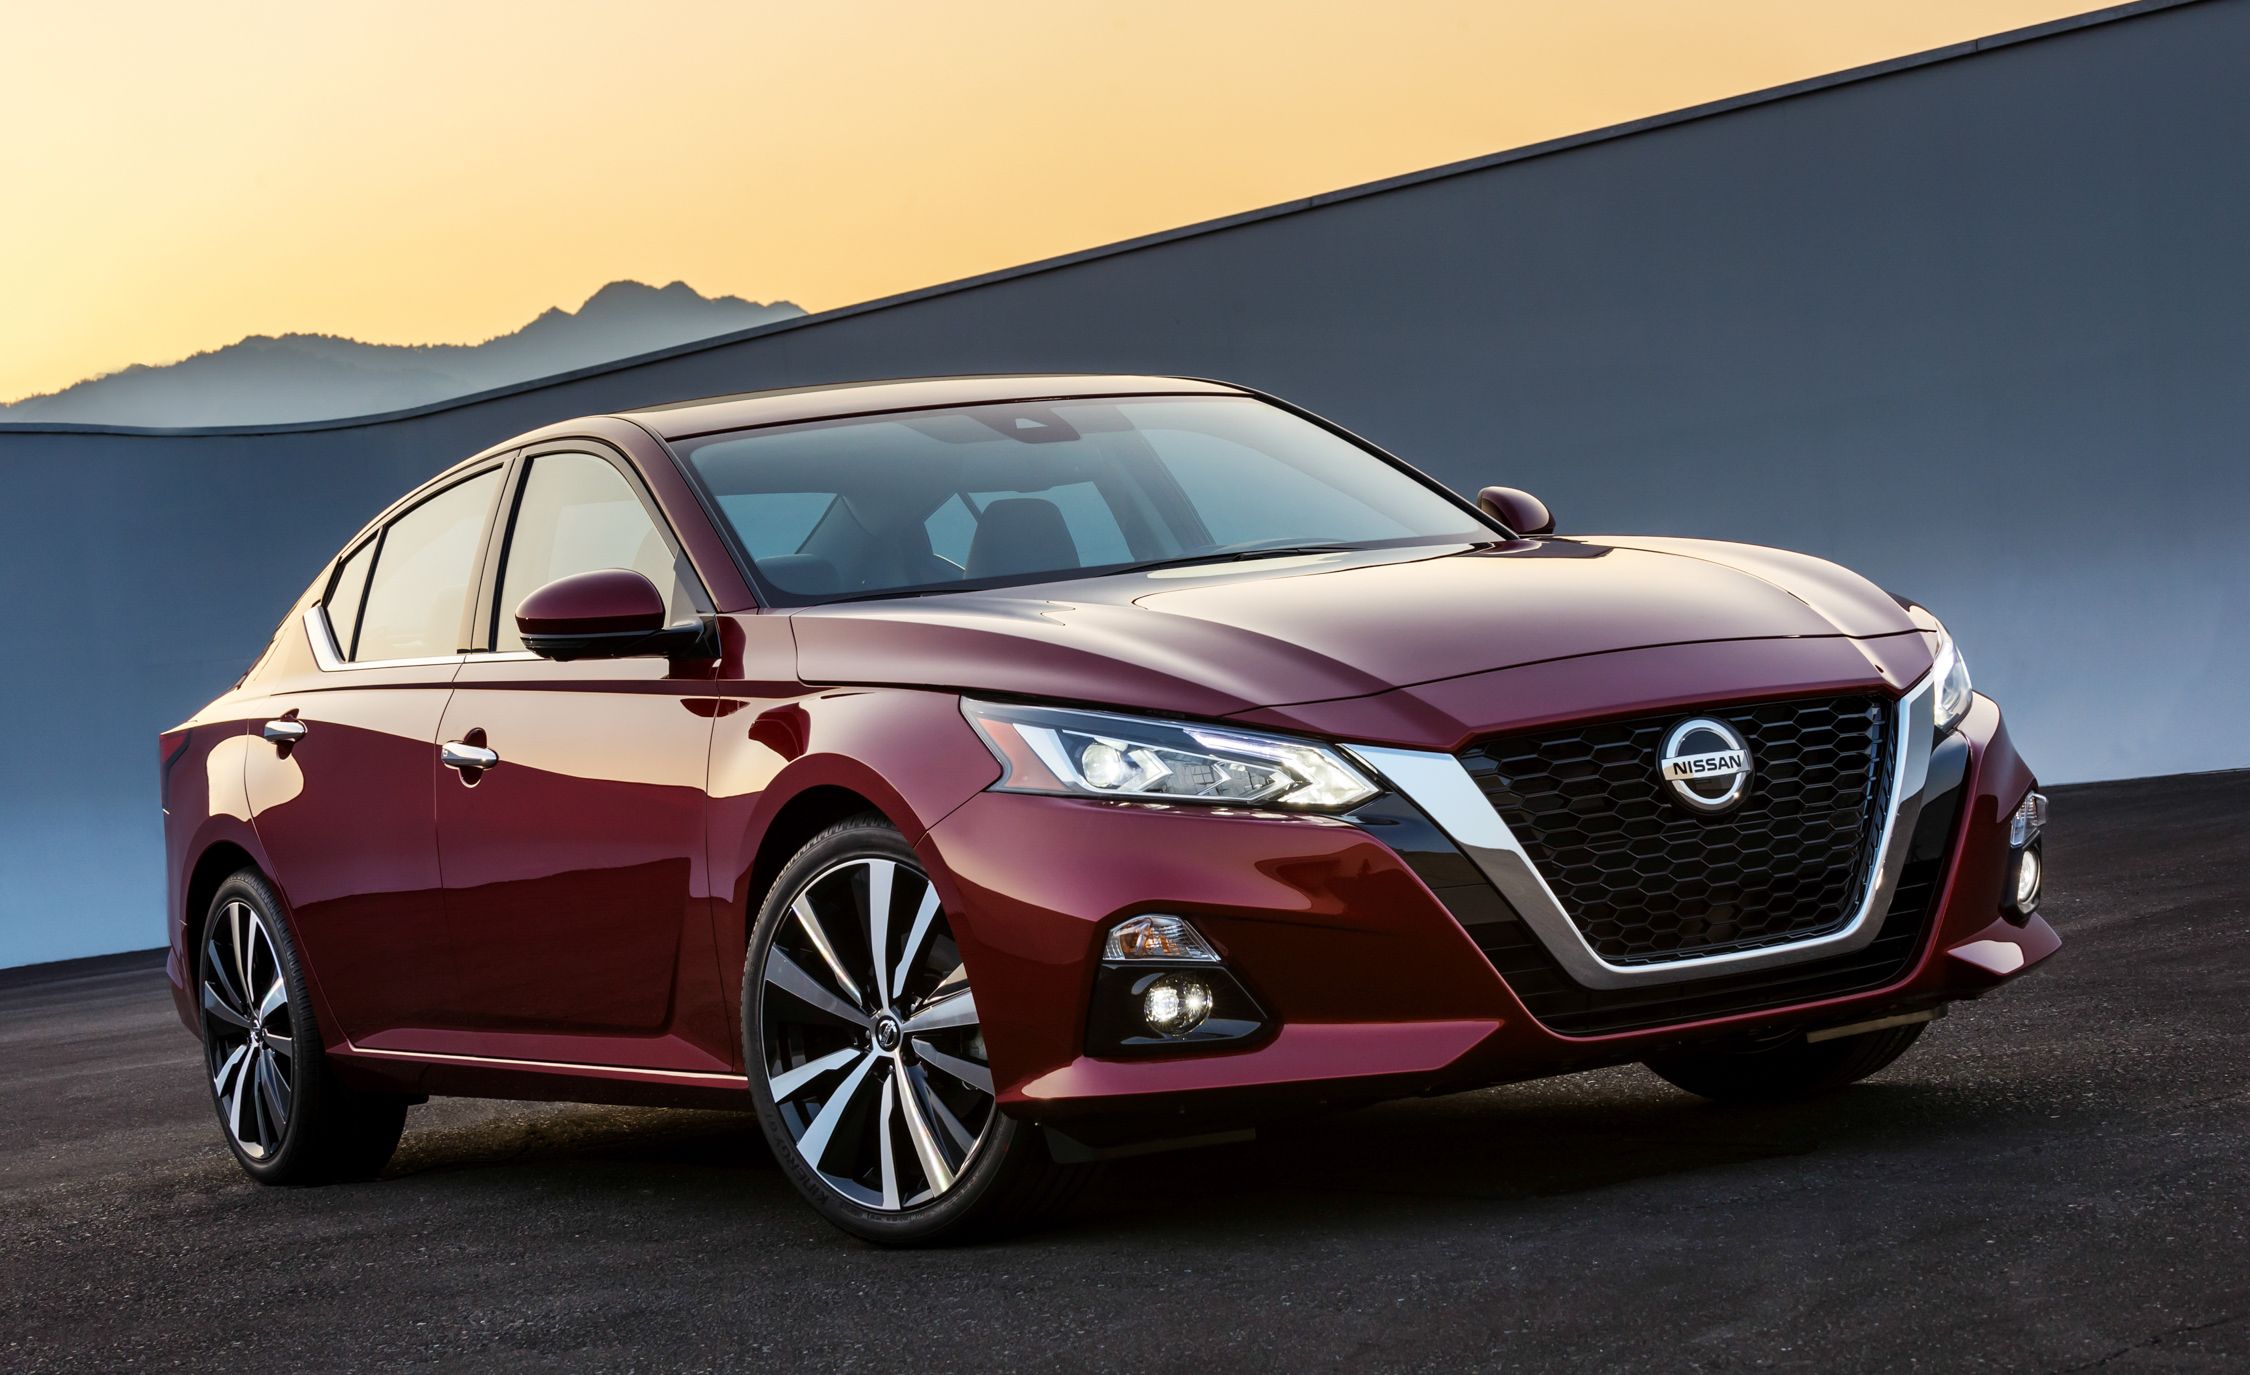 Nissan Tweaks Its Cvt Automatic Again For 2019 Altima News Car And Driver